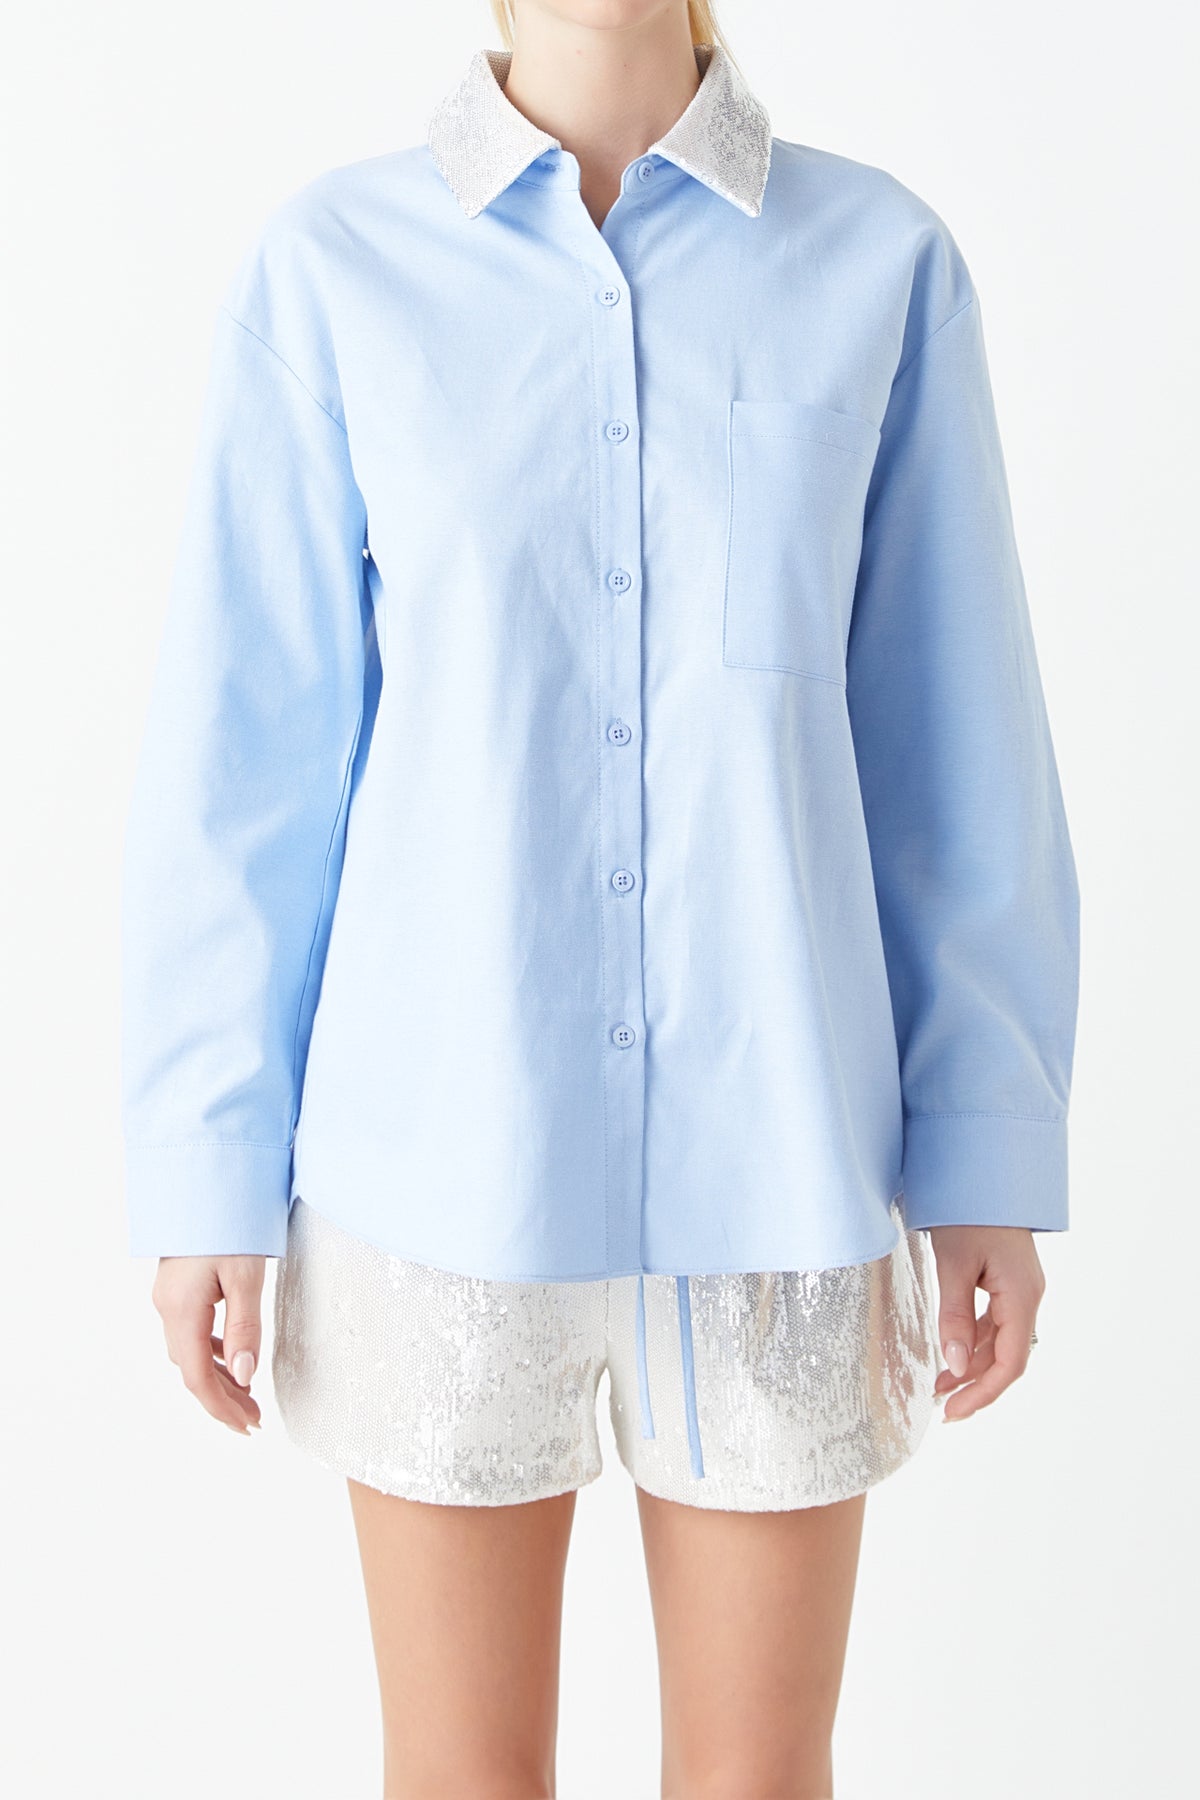 GREY LAB - Oversized Oxford Shirt with Sequin Collar - SHIRTS & BLOUSES available at Objectrare